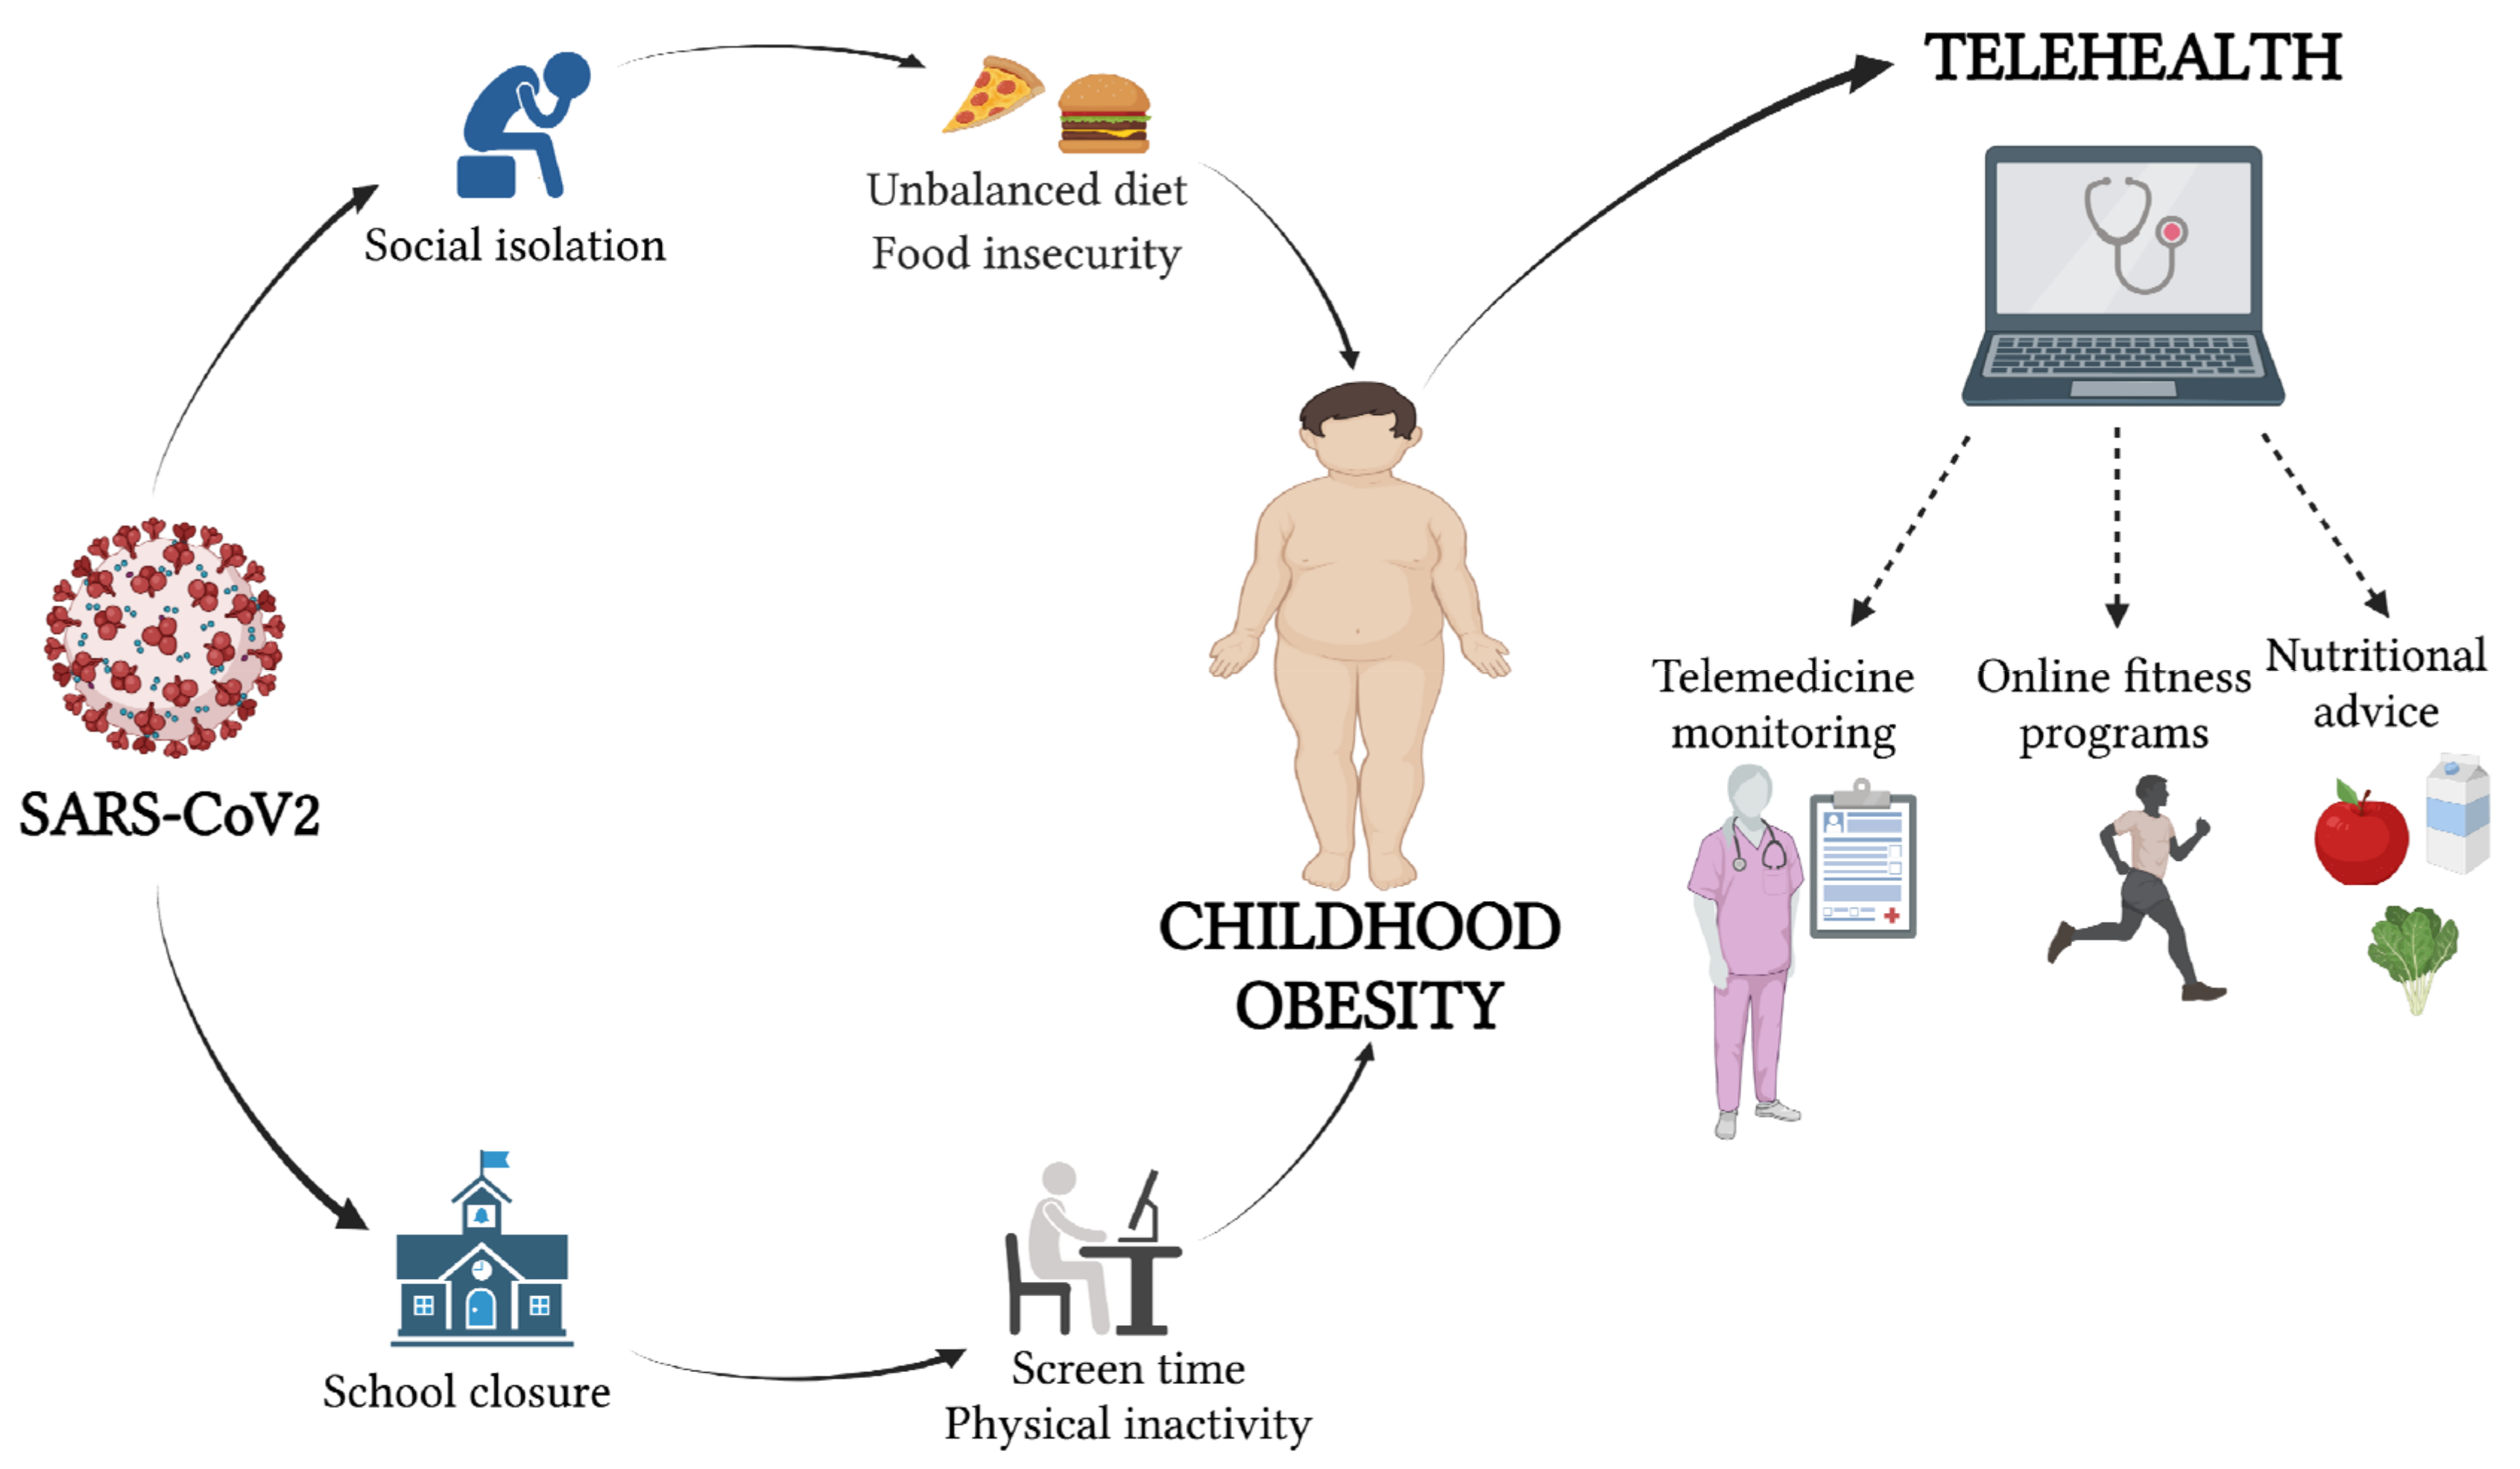 Nutrients | Free Full-Text | Telehealth: A Useful Tool for the Management  of Nutrition and Exercise Programs in Pediatric Obesity in the COVID-19 Era